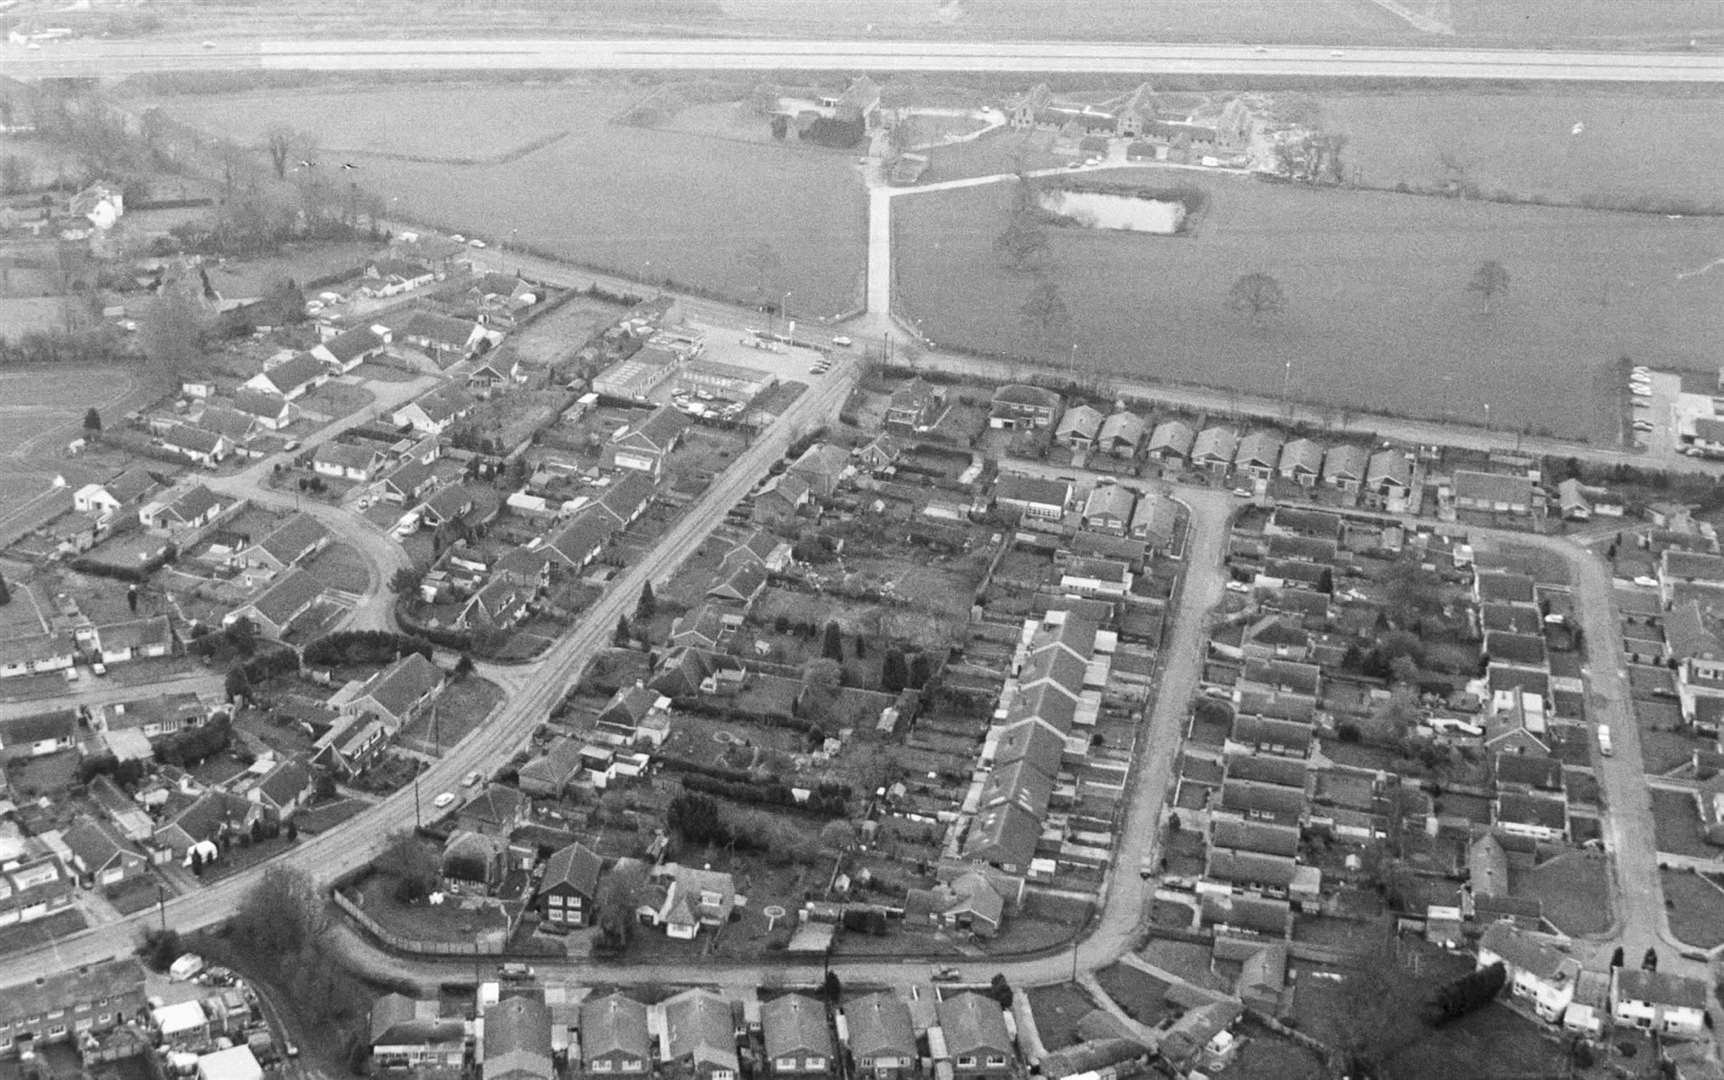 Sellindge from above in 1989. Scores of homes are proposed or currently being constructed around the village